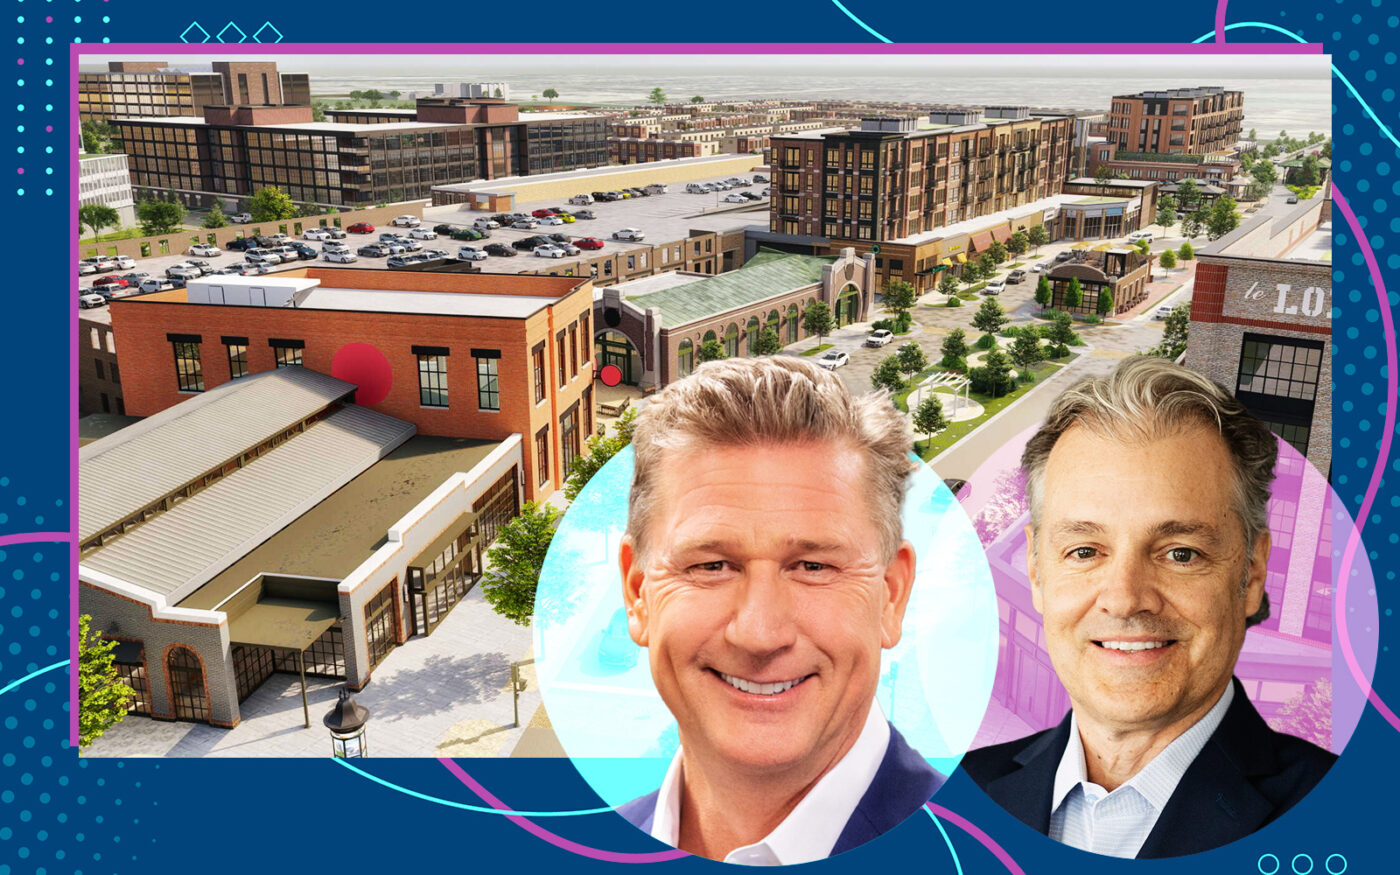 UrbanStreet co-founders Robert Burk and Robert Kuker with a rendering of The District at Veridian